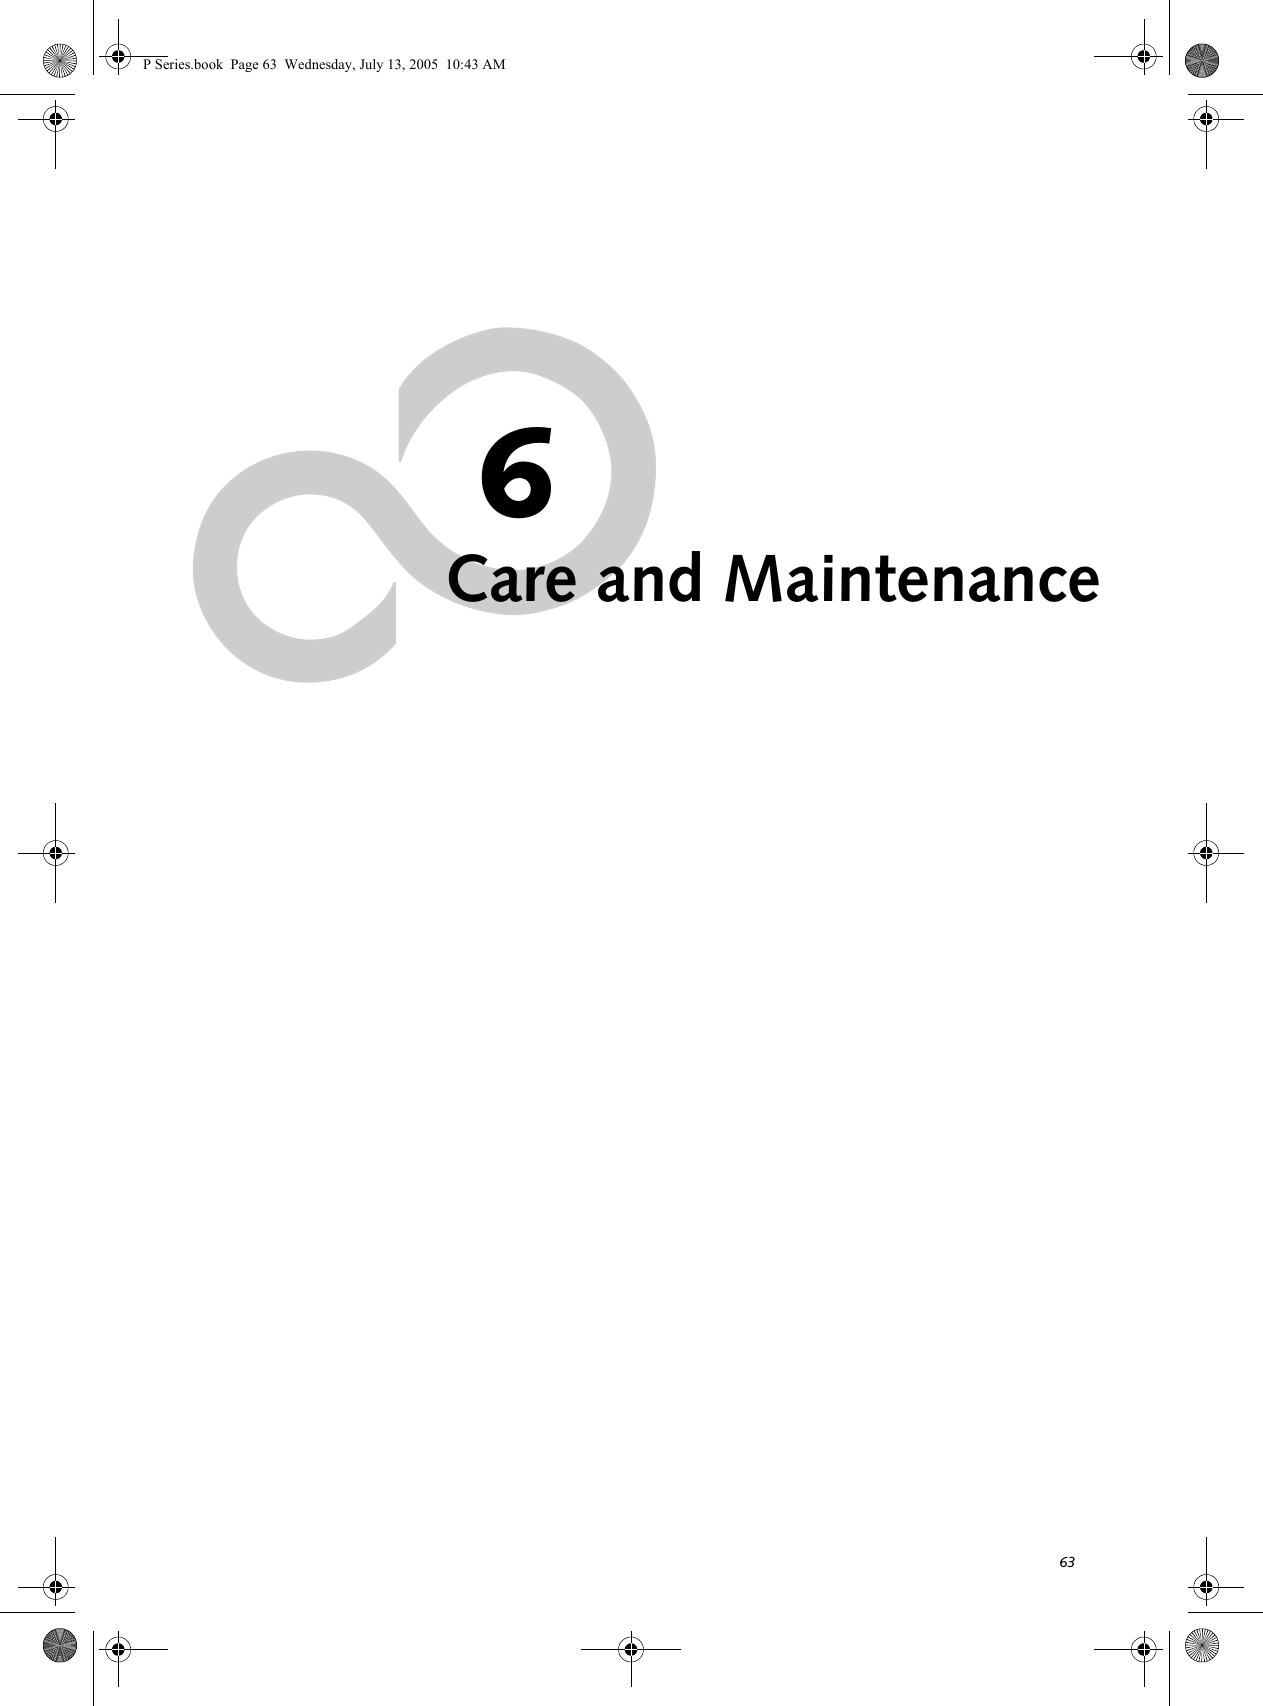 636Care and MaintenanceP Series.book  Page 63  Wednesday, July 13, 2005  10:43 AM